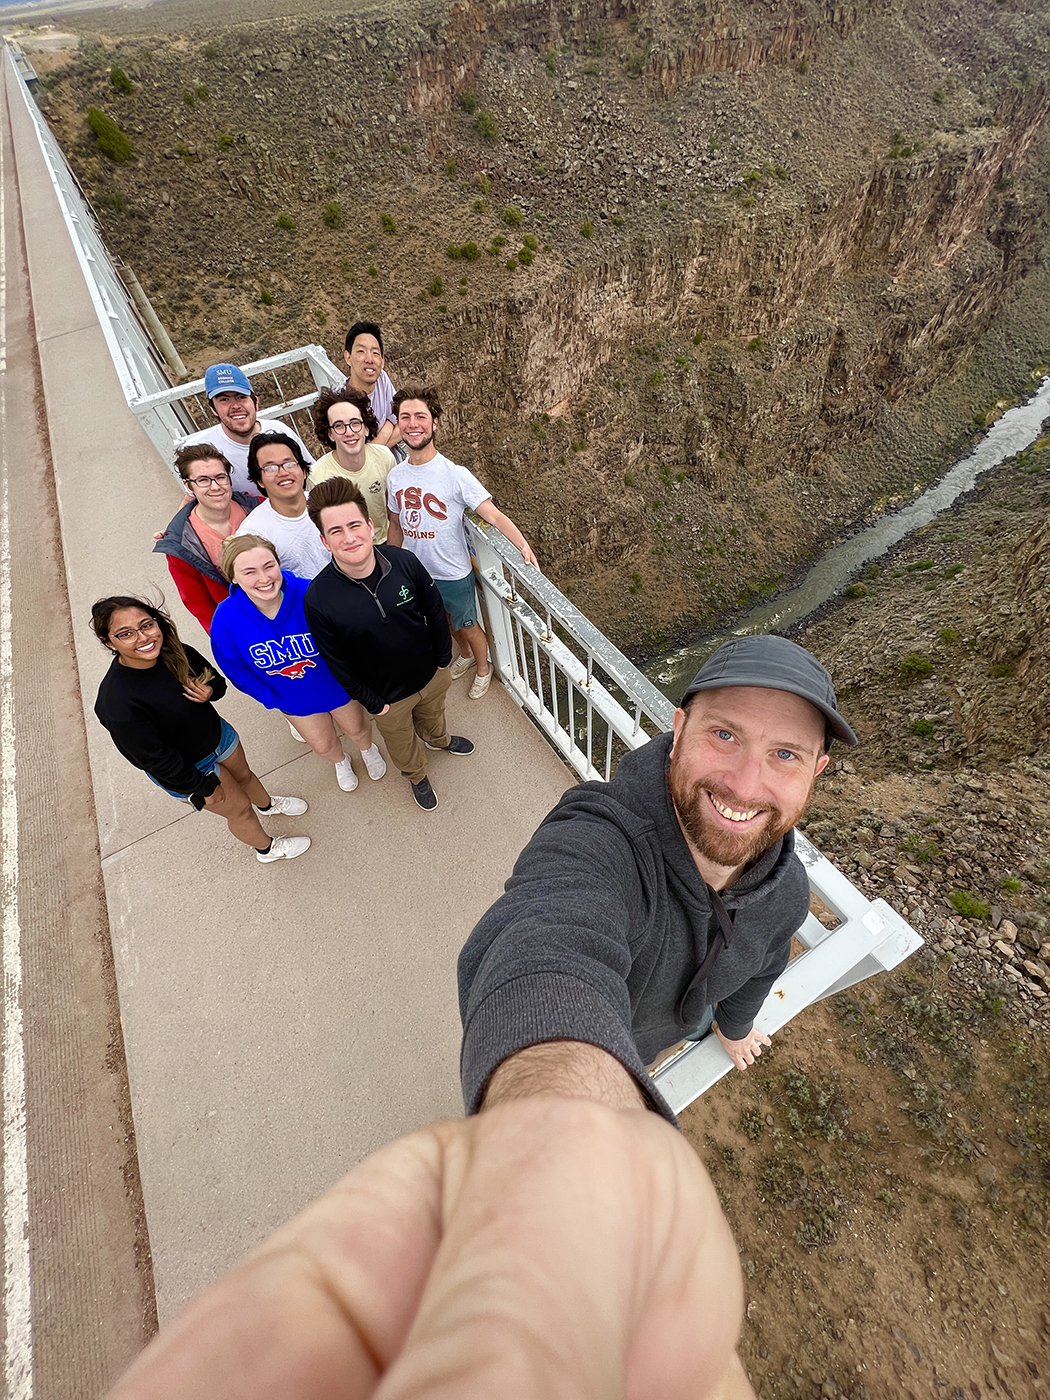 SMU-in-Taos faculty member takes an overhead selfie with his class